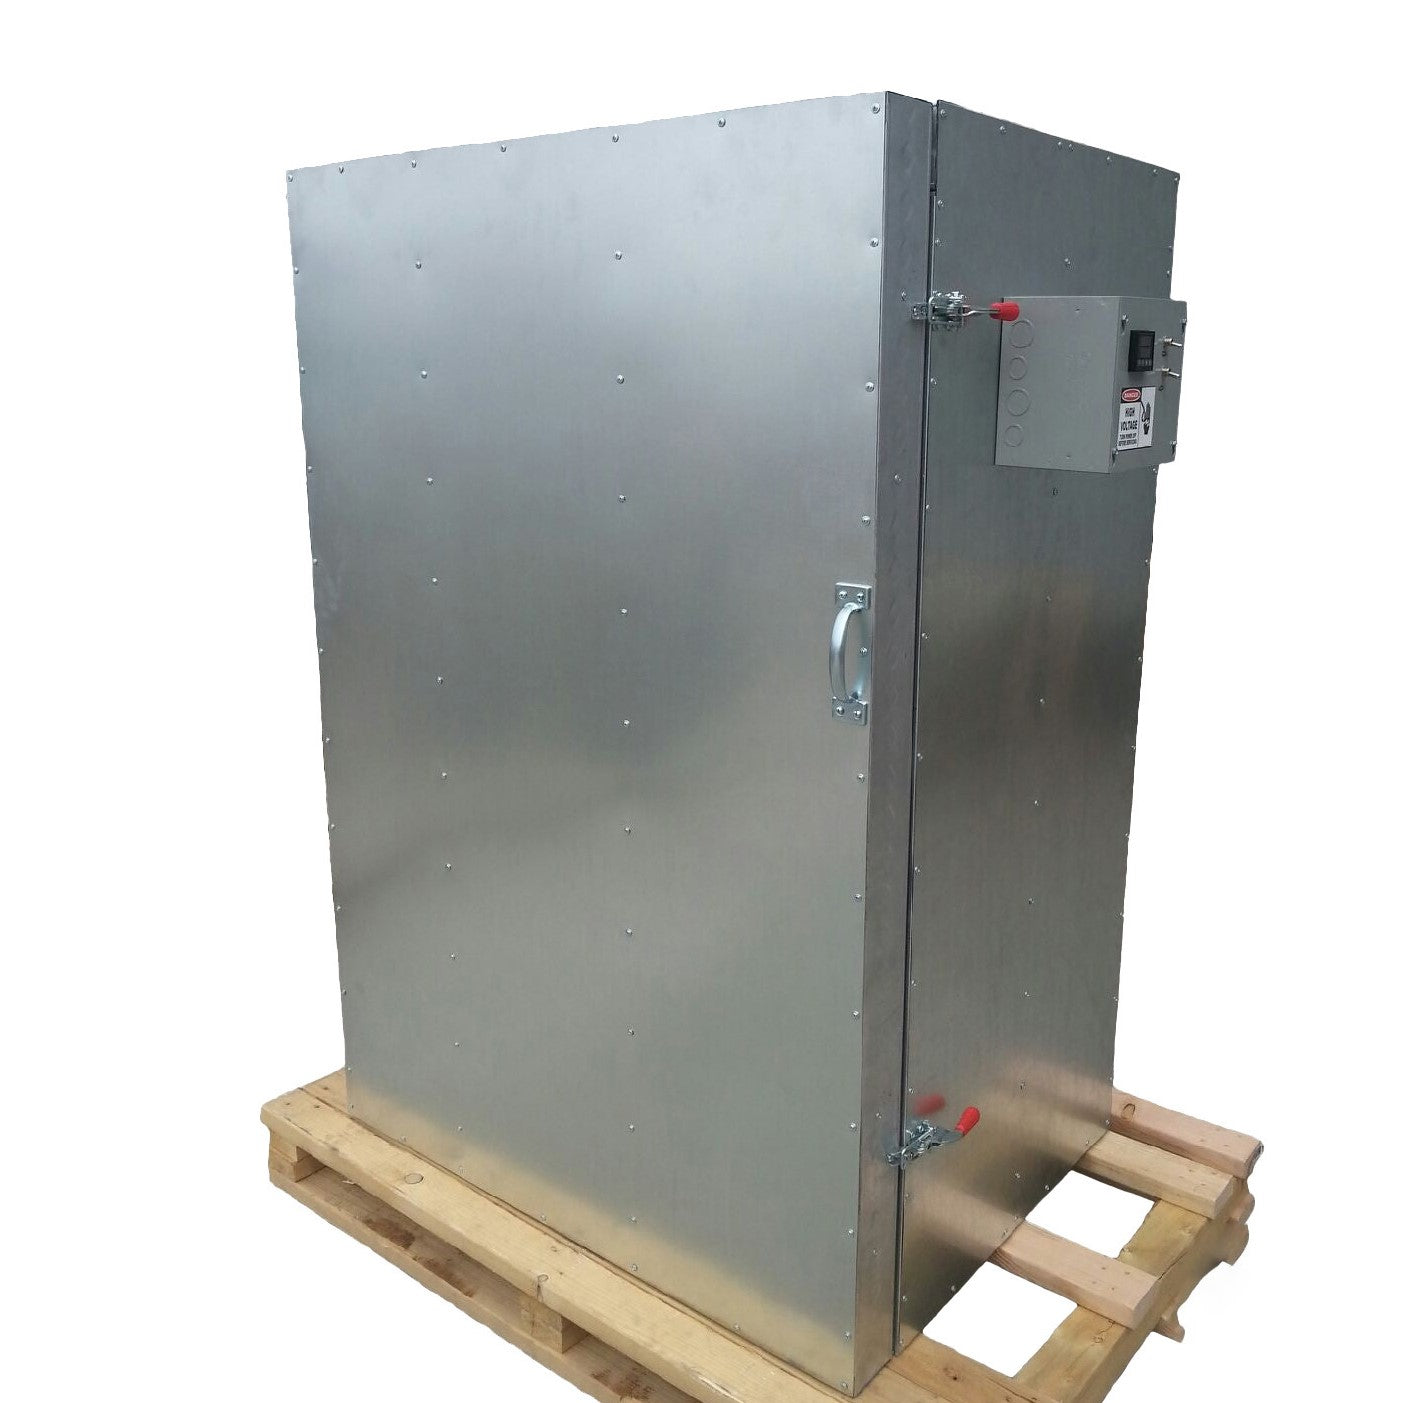 3x3x6 Electric Oven For Powder Coat - Standard Series (Summer Specials)